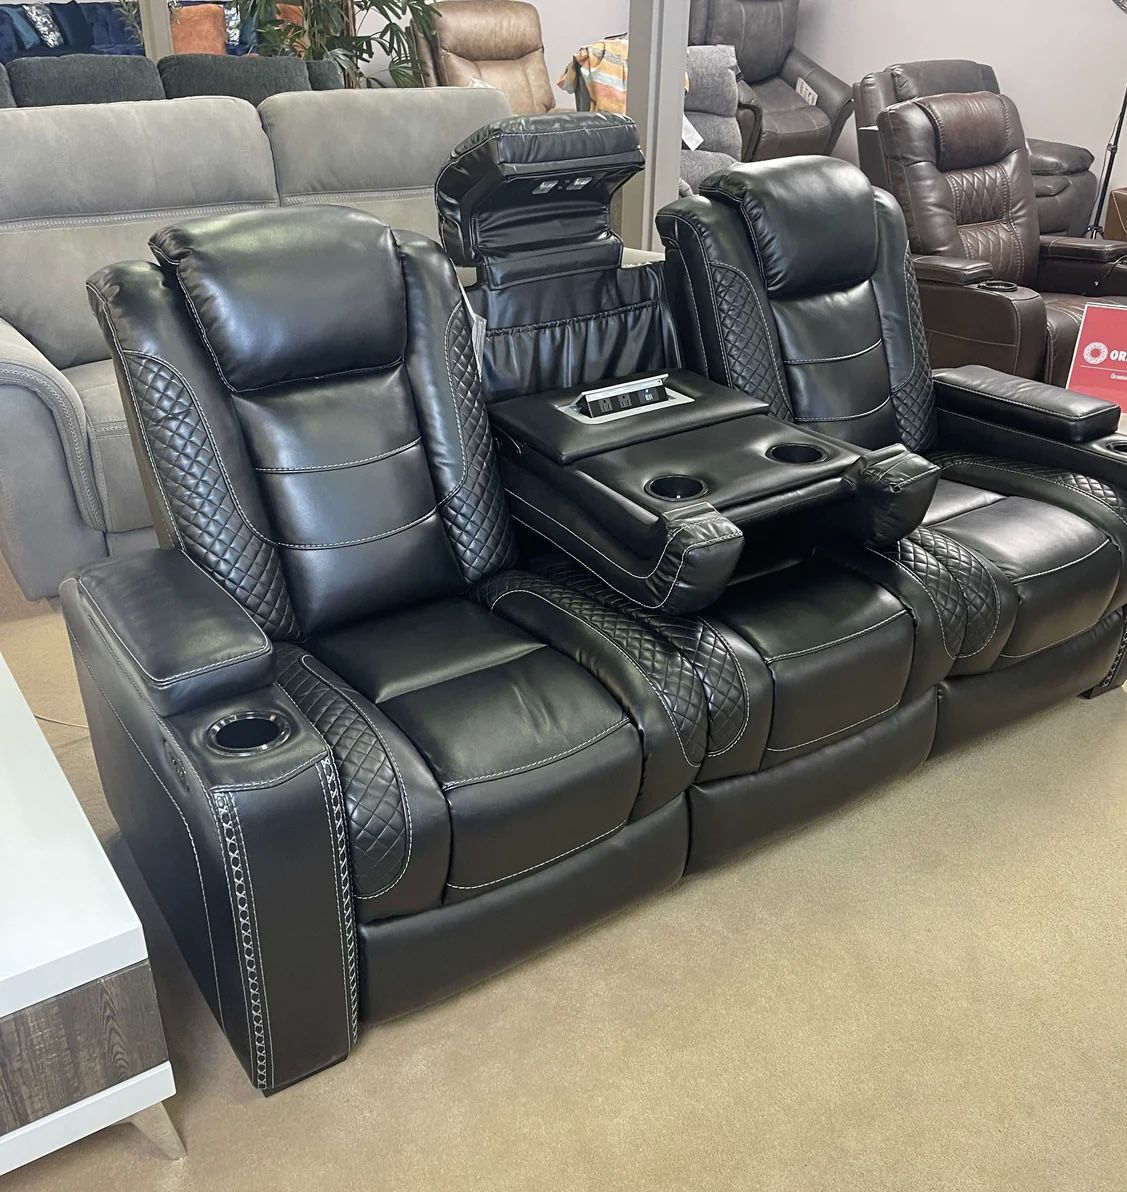 🦋Showroom,Fast Delivery, Finance,Web🦋 Power Reclining Sofa w/LED & Drop Down Table Black Couch